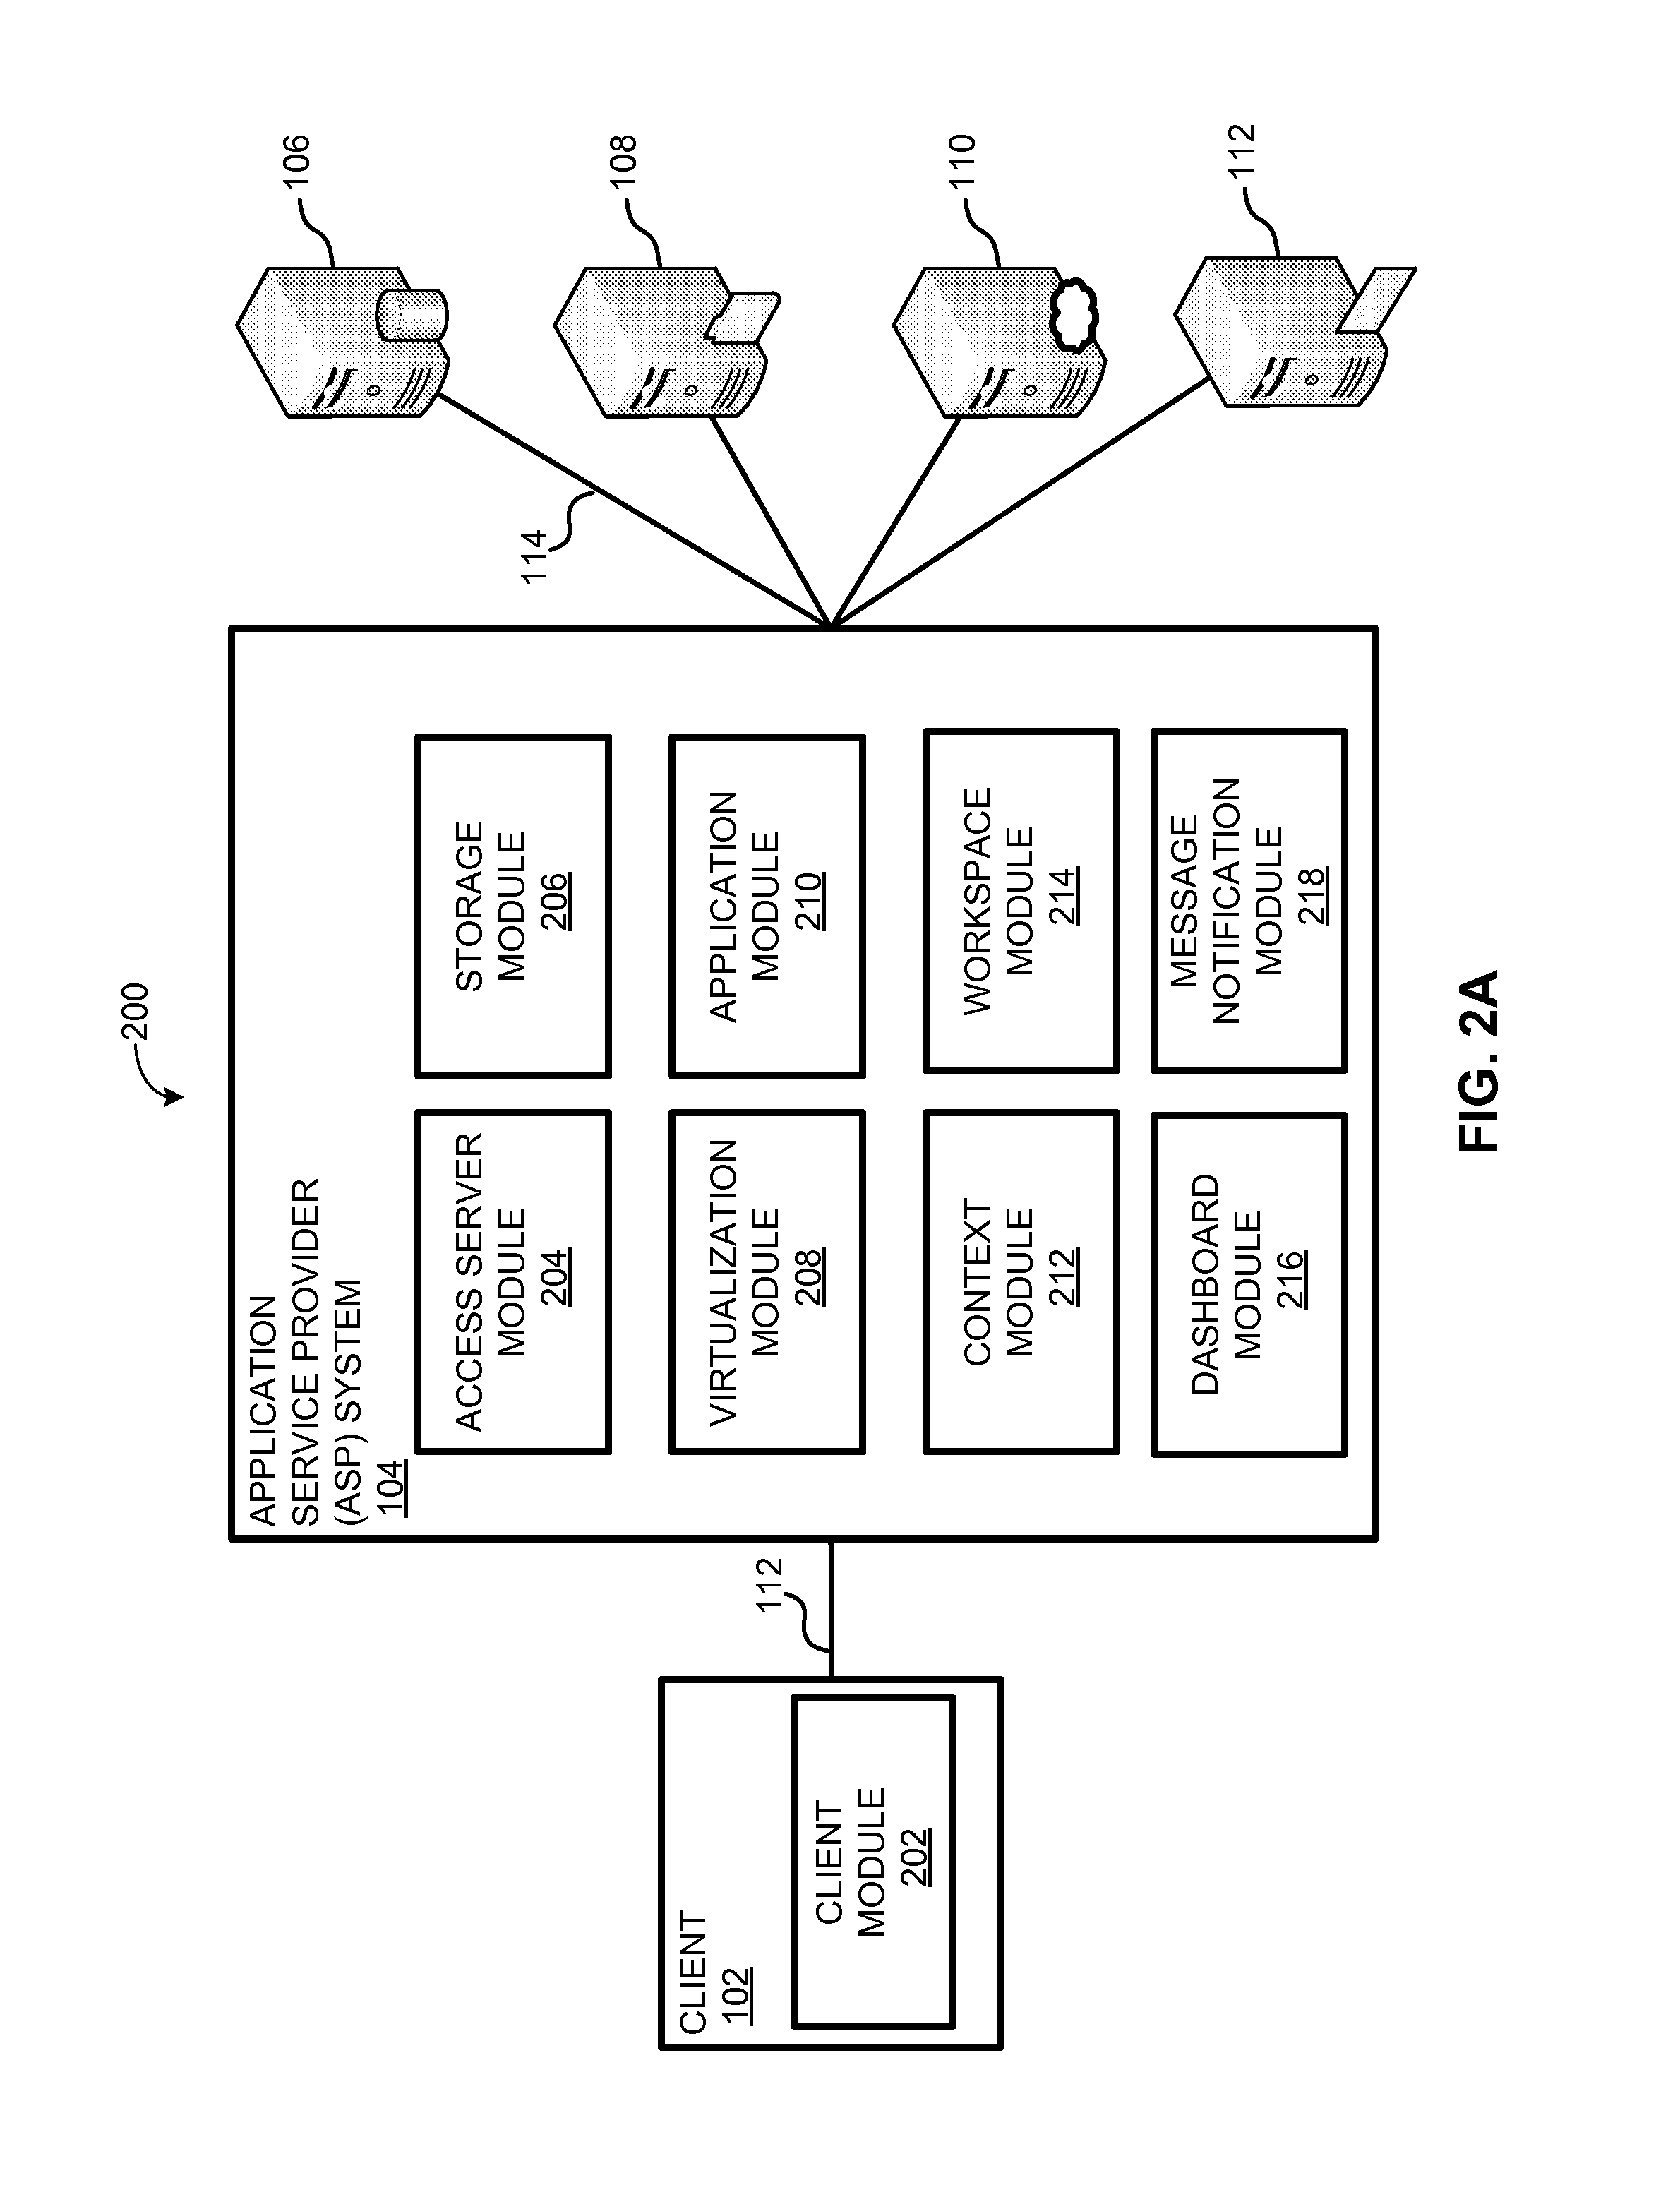 Systems and methods for supporting social productivity using thresholding